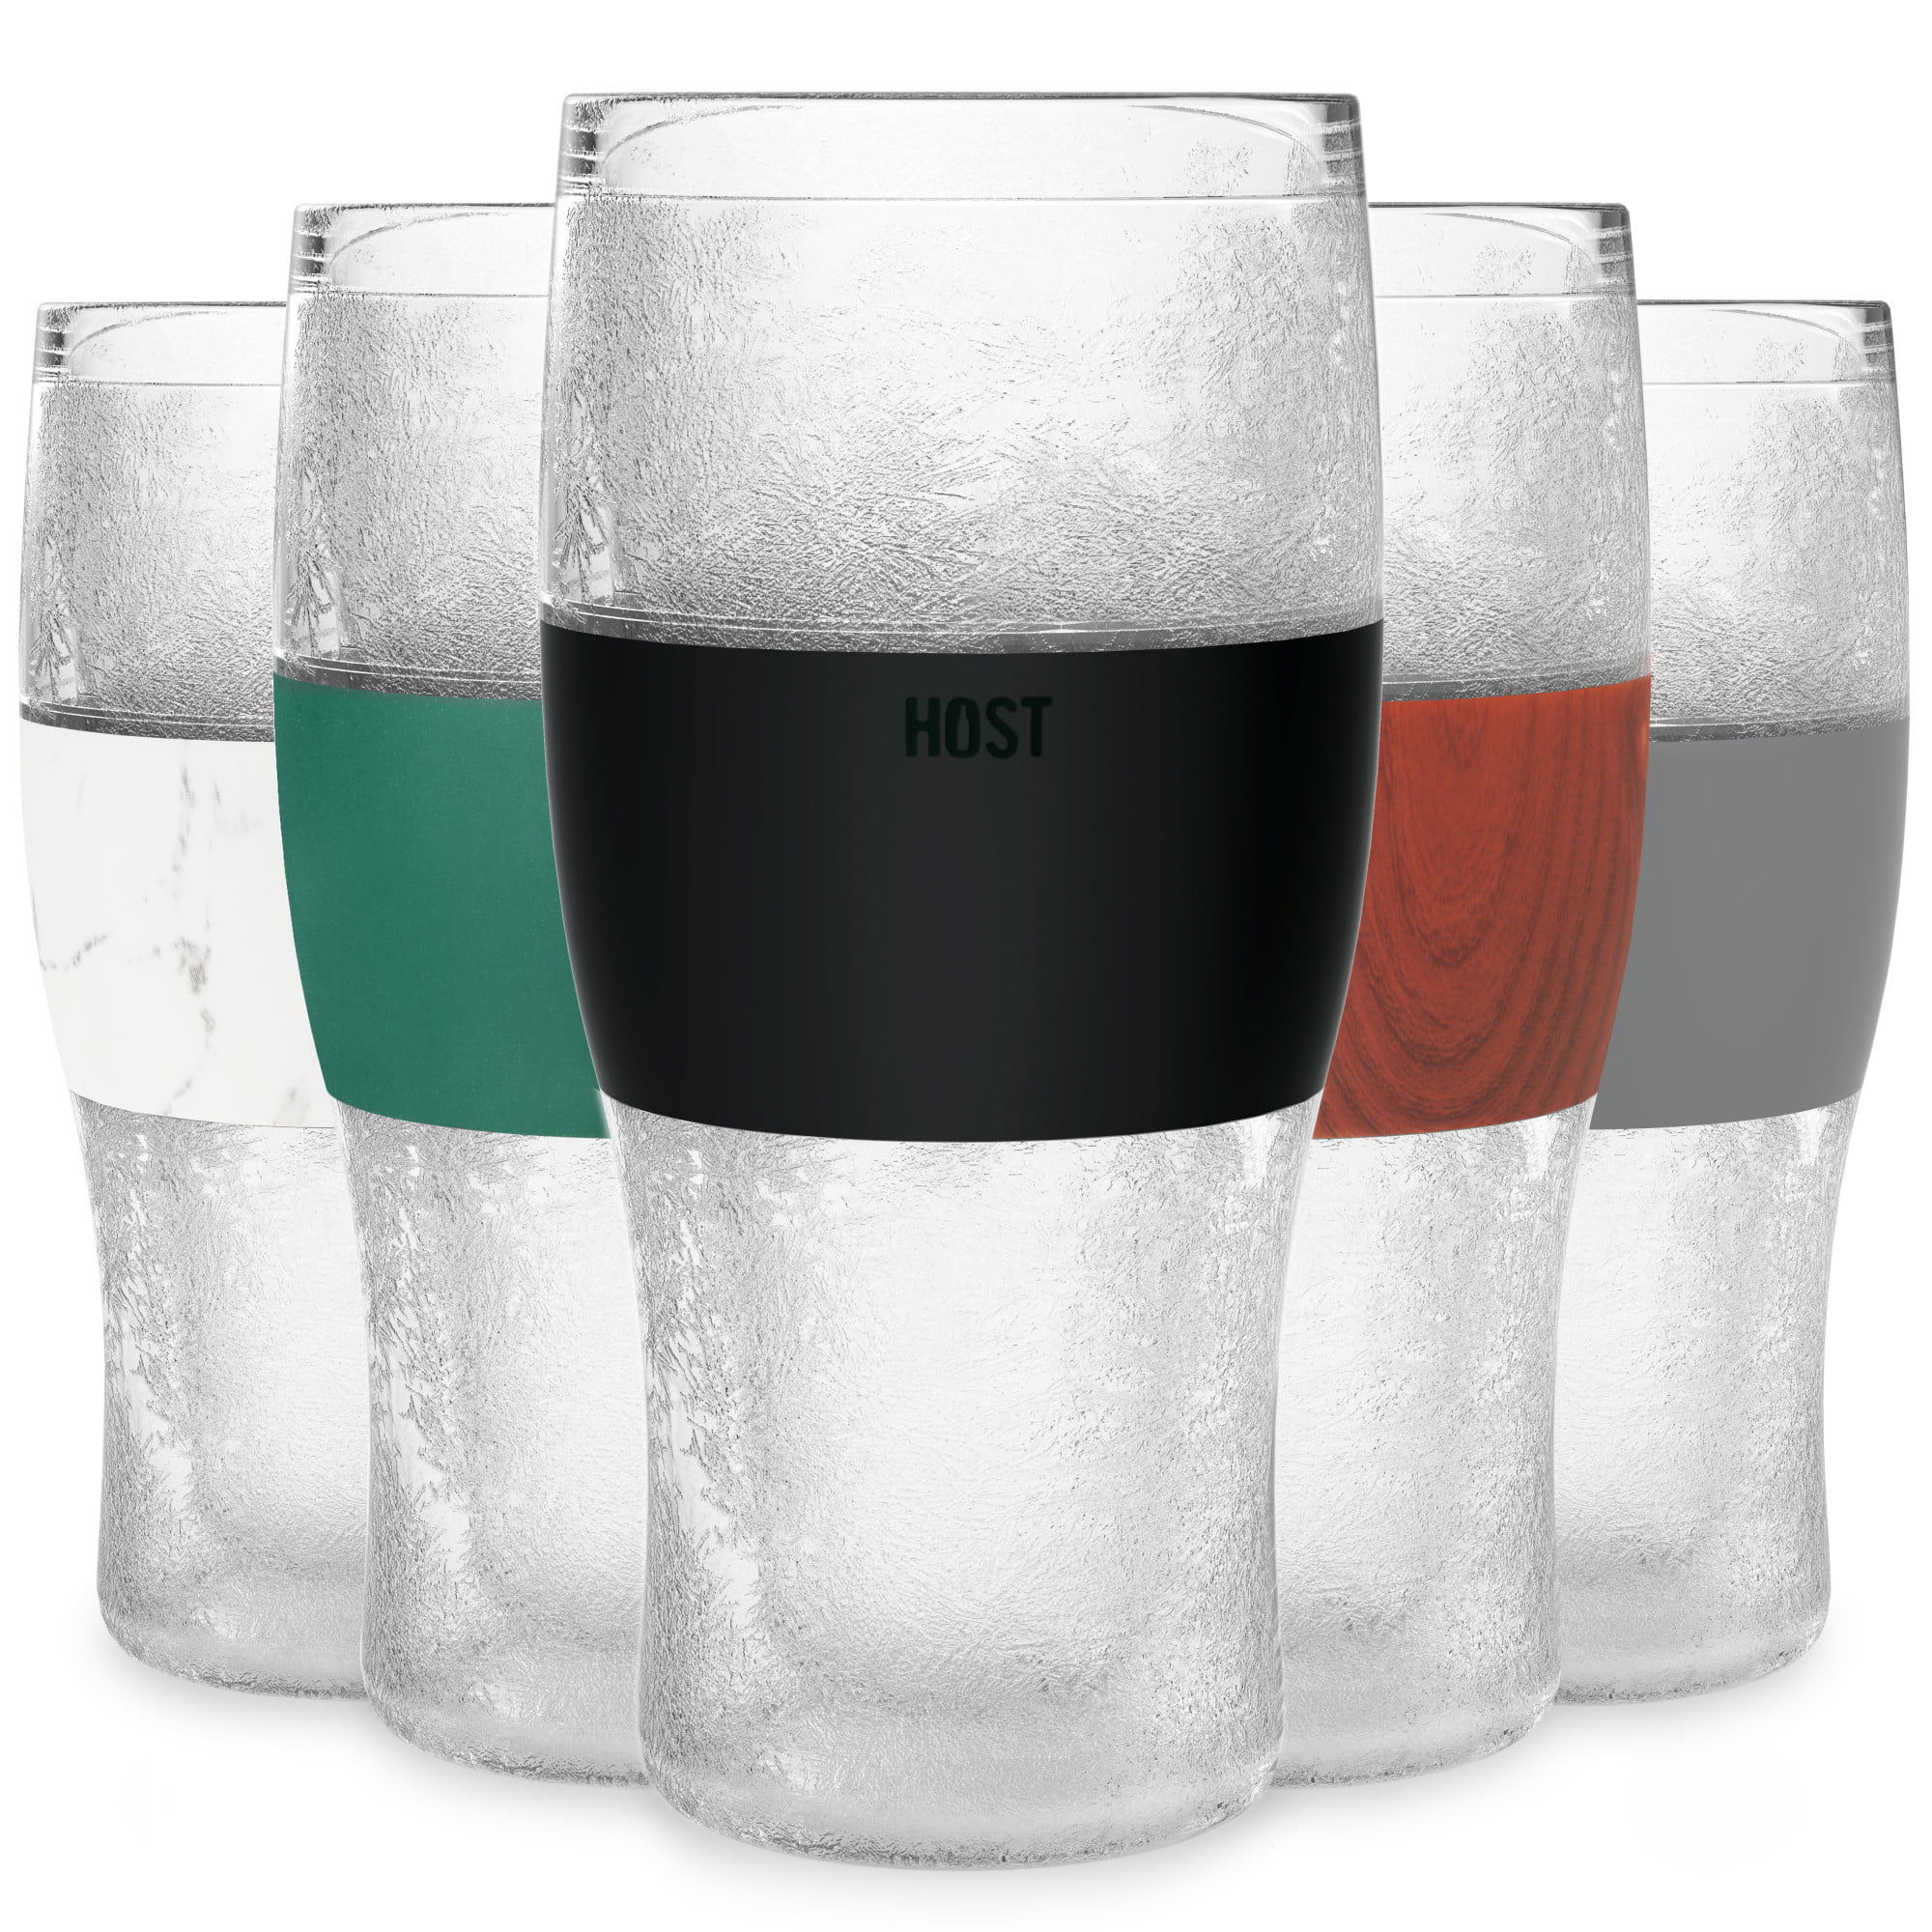 Host FREEZE Beer Glasses, Frozen Beer Mugs, Freezable Pint Glass Set,  Insulated Beer Glass to Keep Your Drinks Cold, Double Walled Insulated  Glasses, Tumbler for Iced Coffee, 16oz, Set of 2, Gray: Beer Glasses 